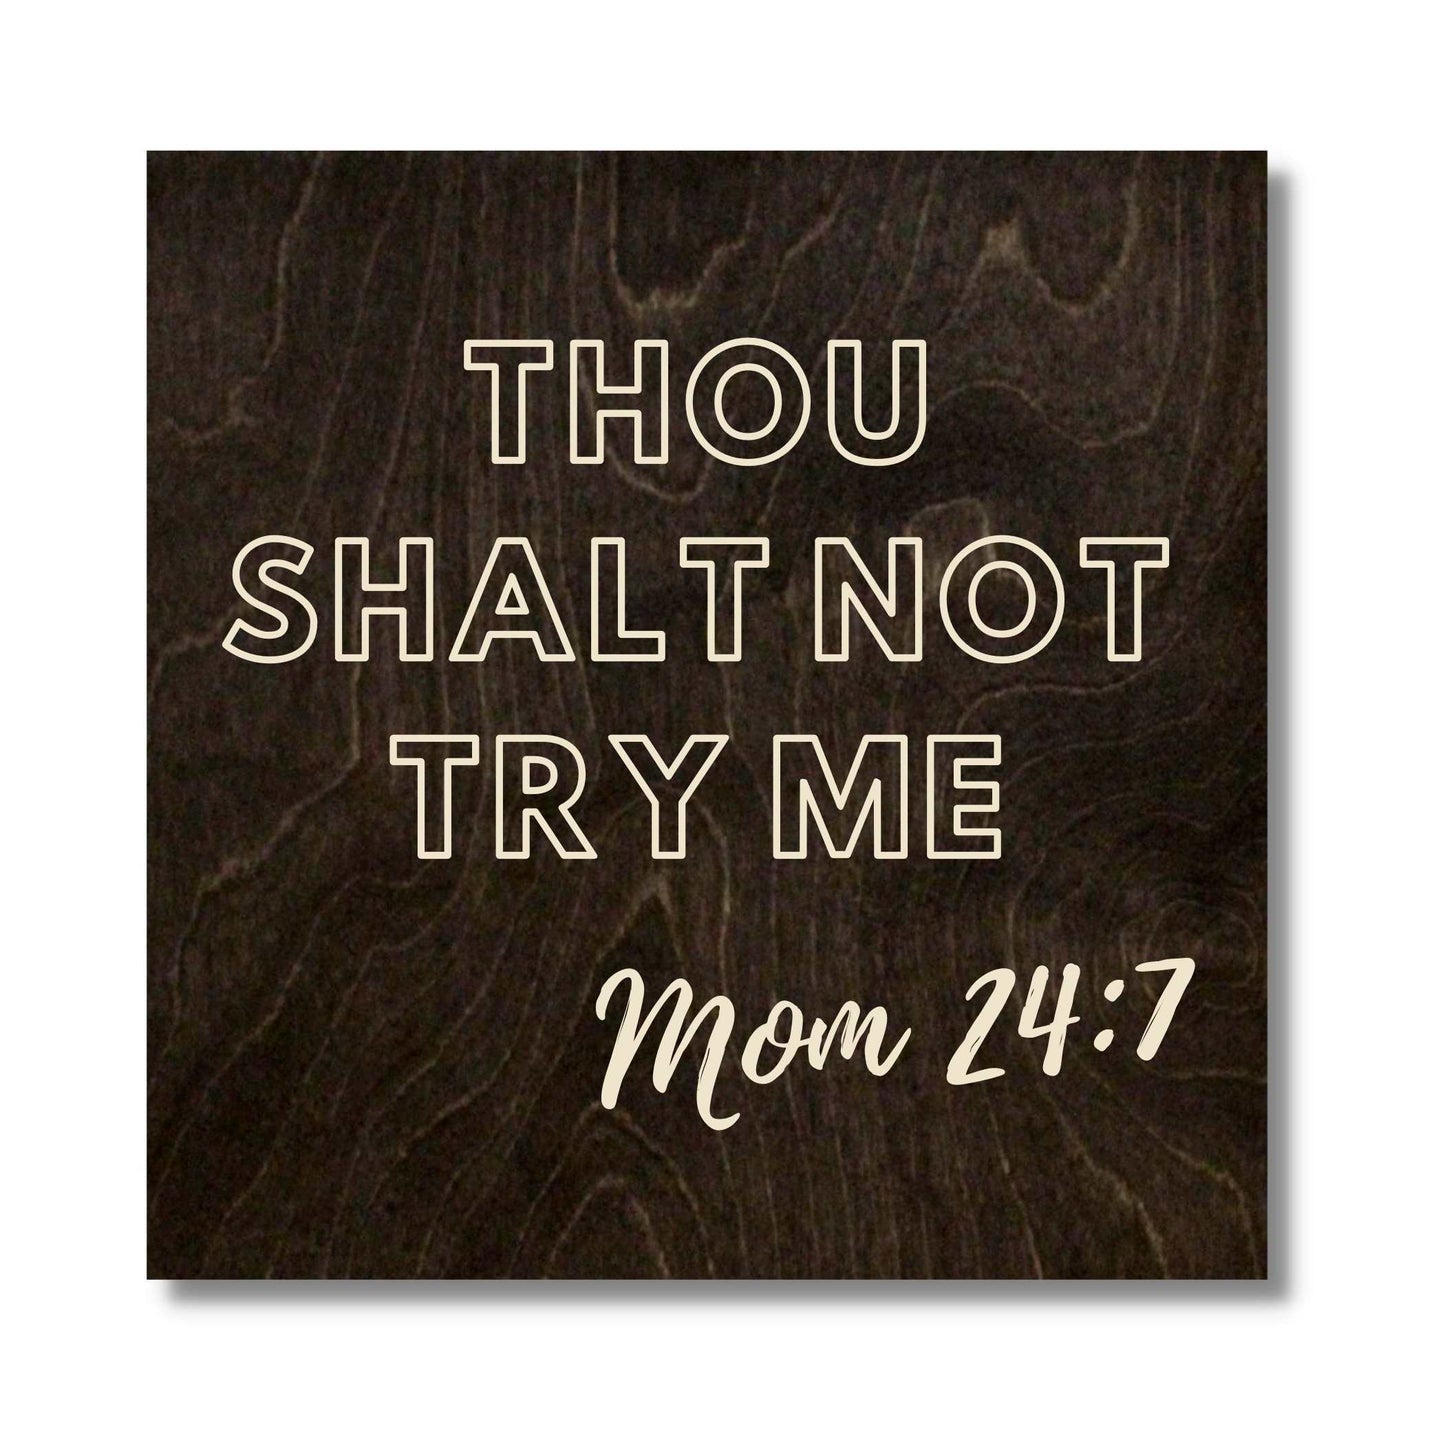 Thou Shall Not Try Me -Mom 24:7